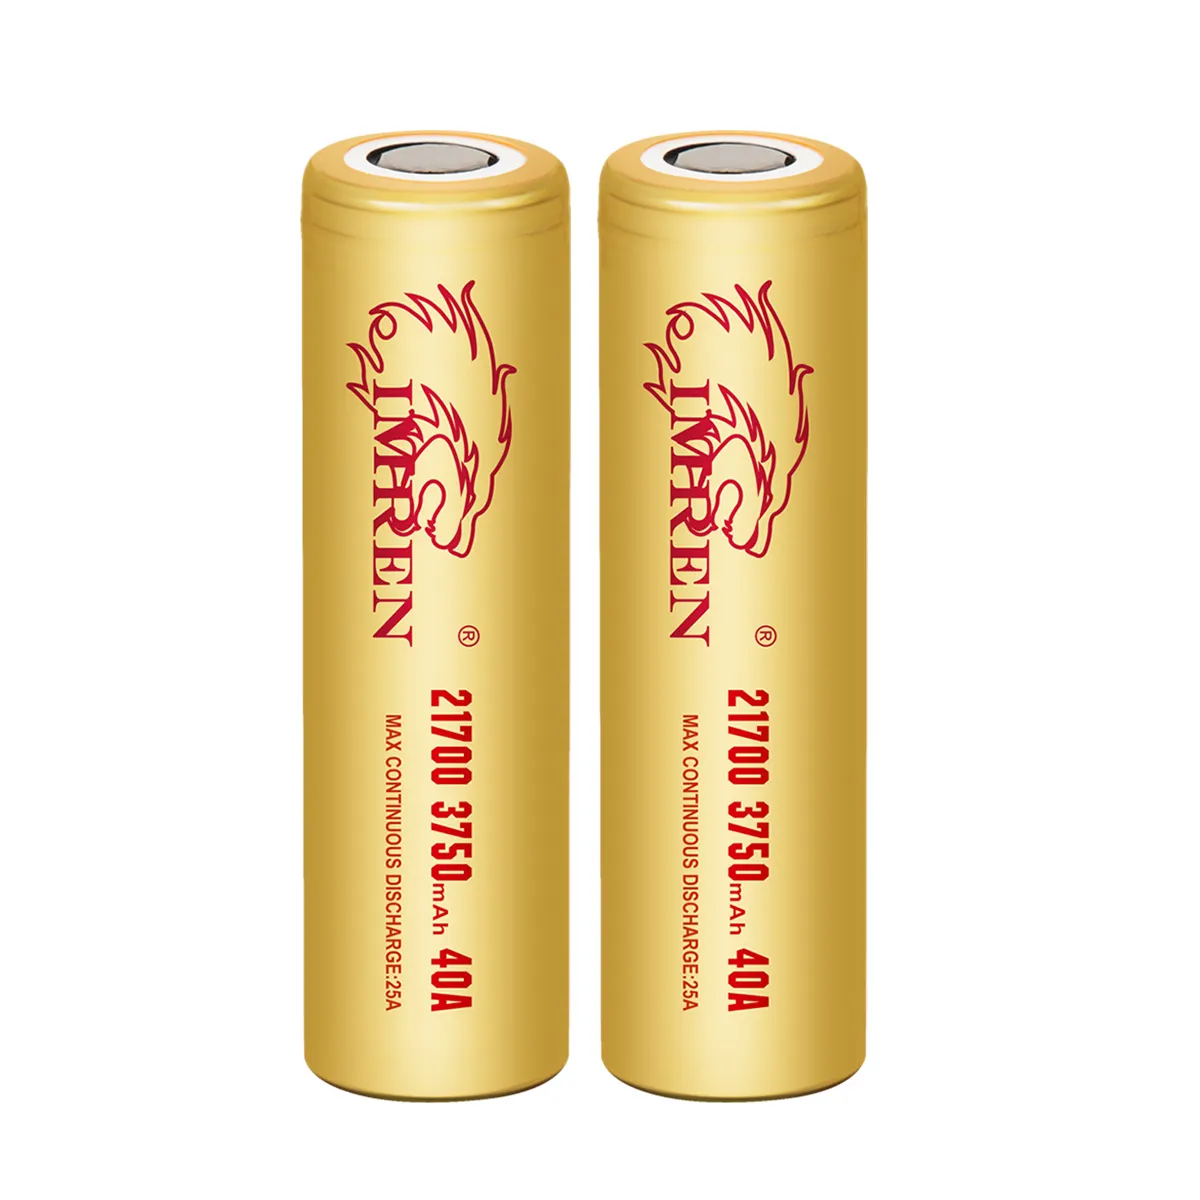 Imren gold 21700 battery 3.7v 3750mah 40a rechargeable batera for electric vehicle li ion battery cell